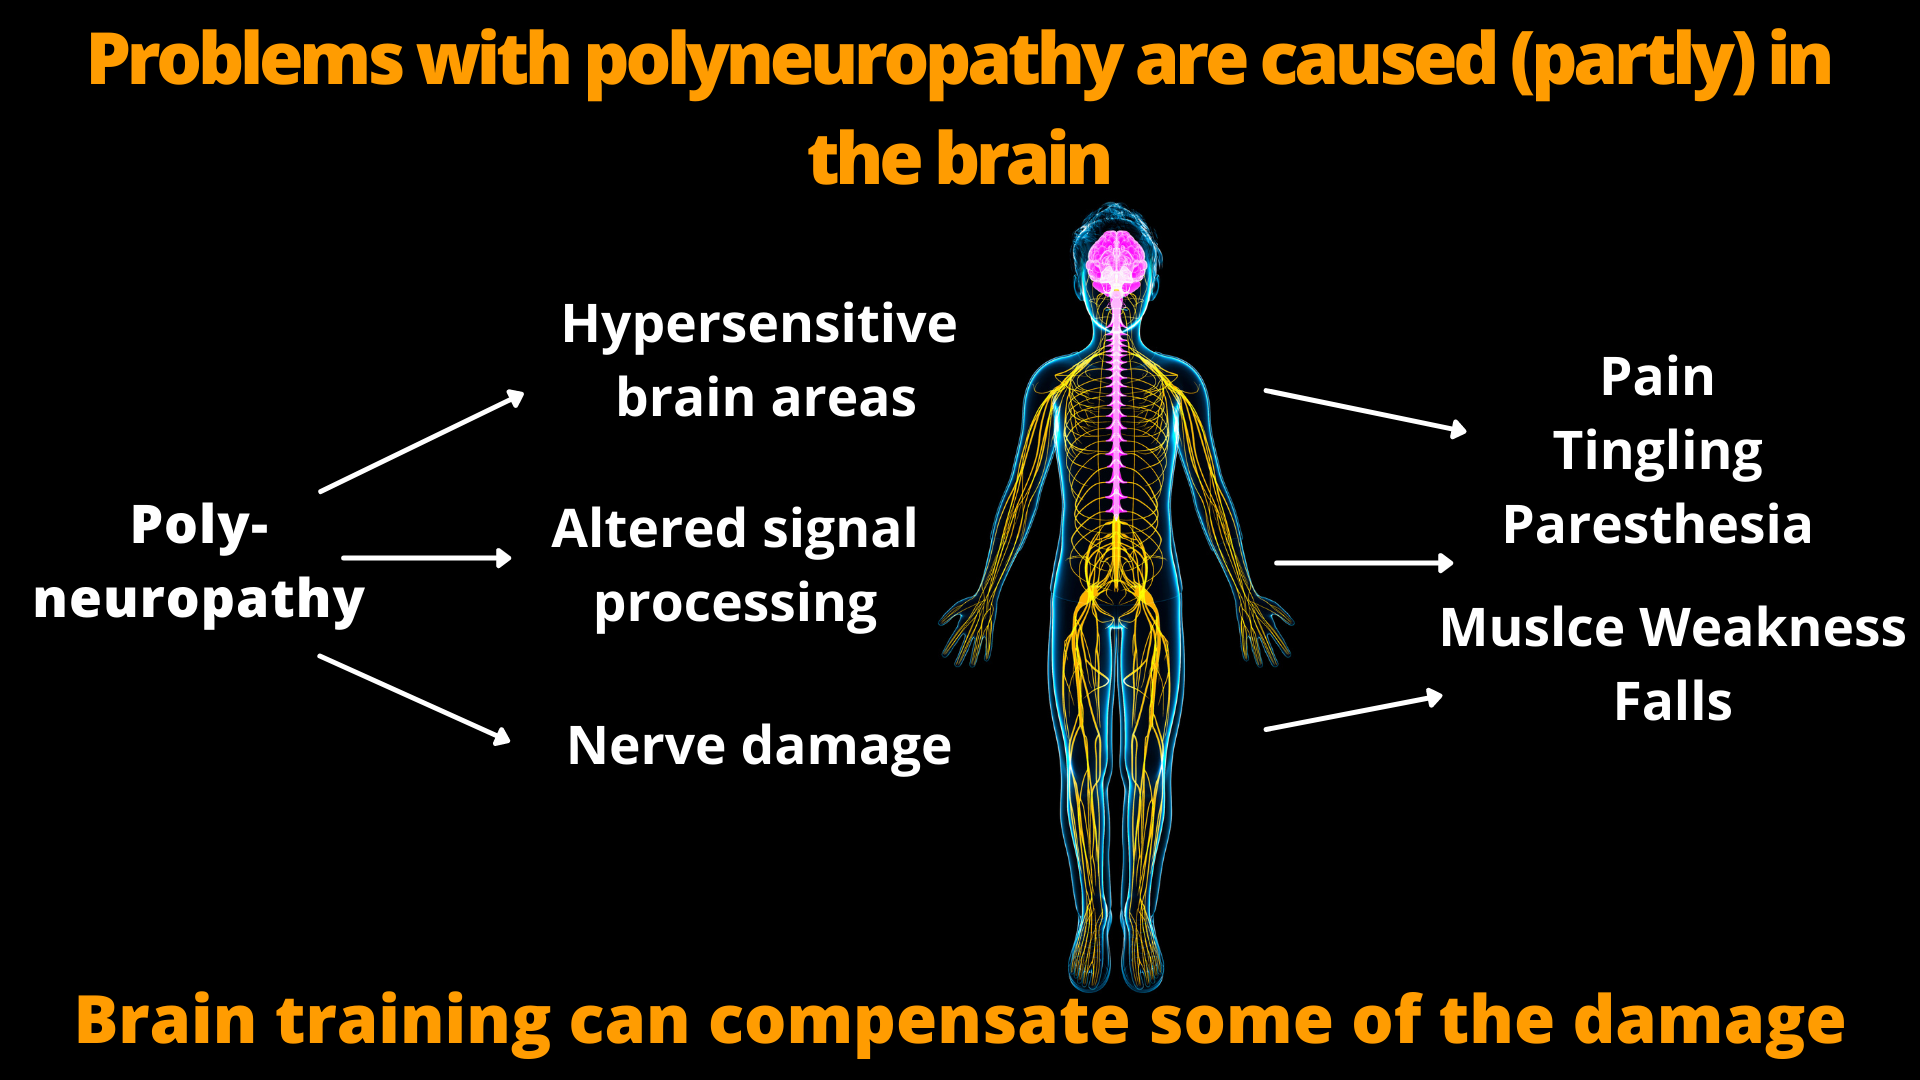 Pain in polyneuropathy arises in part in the brain